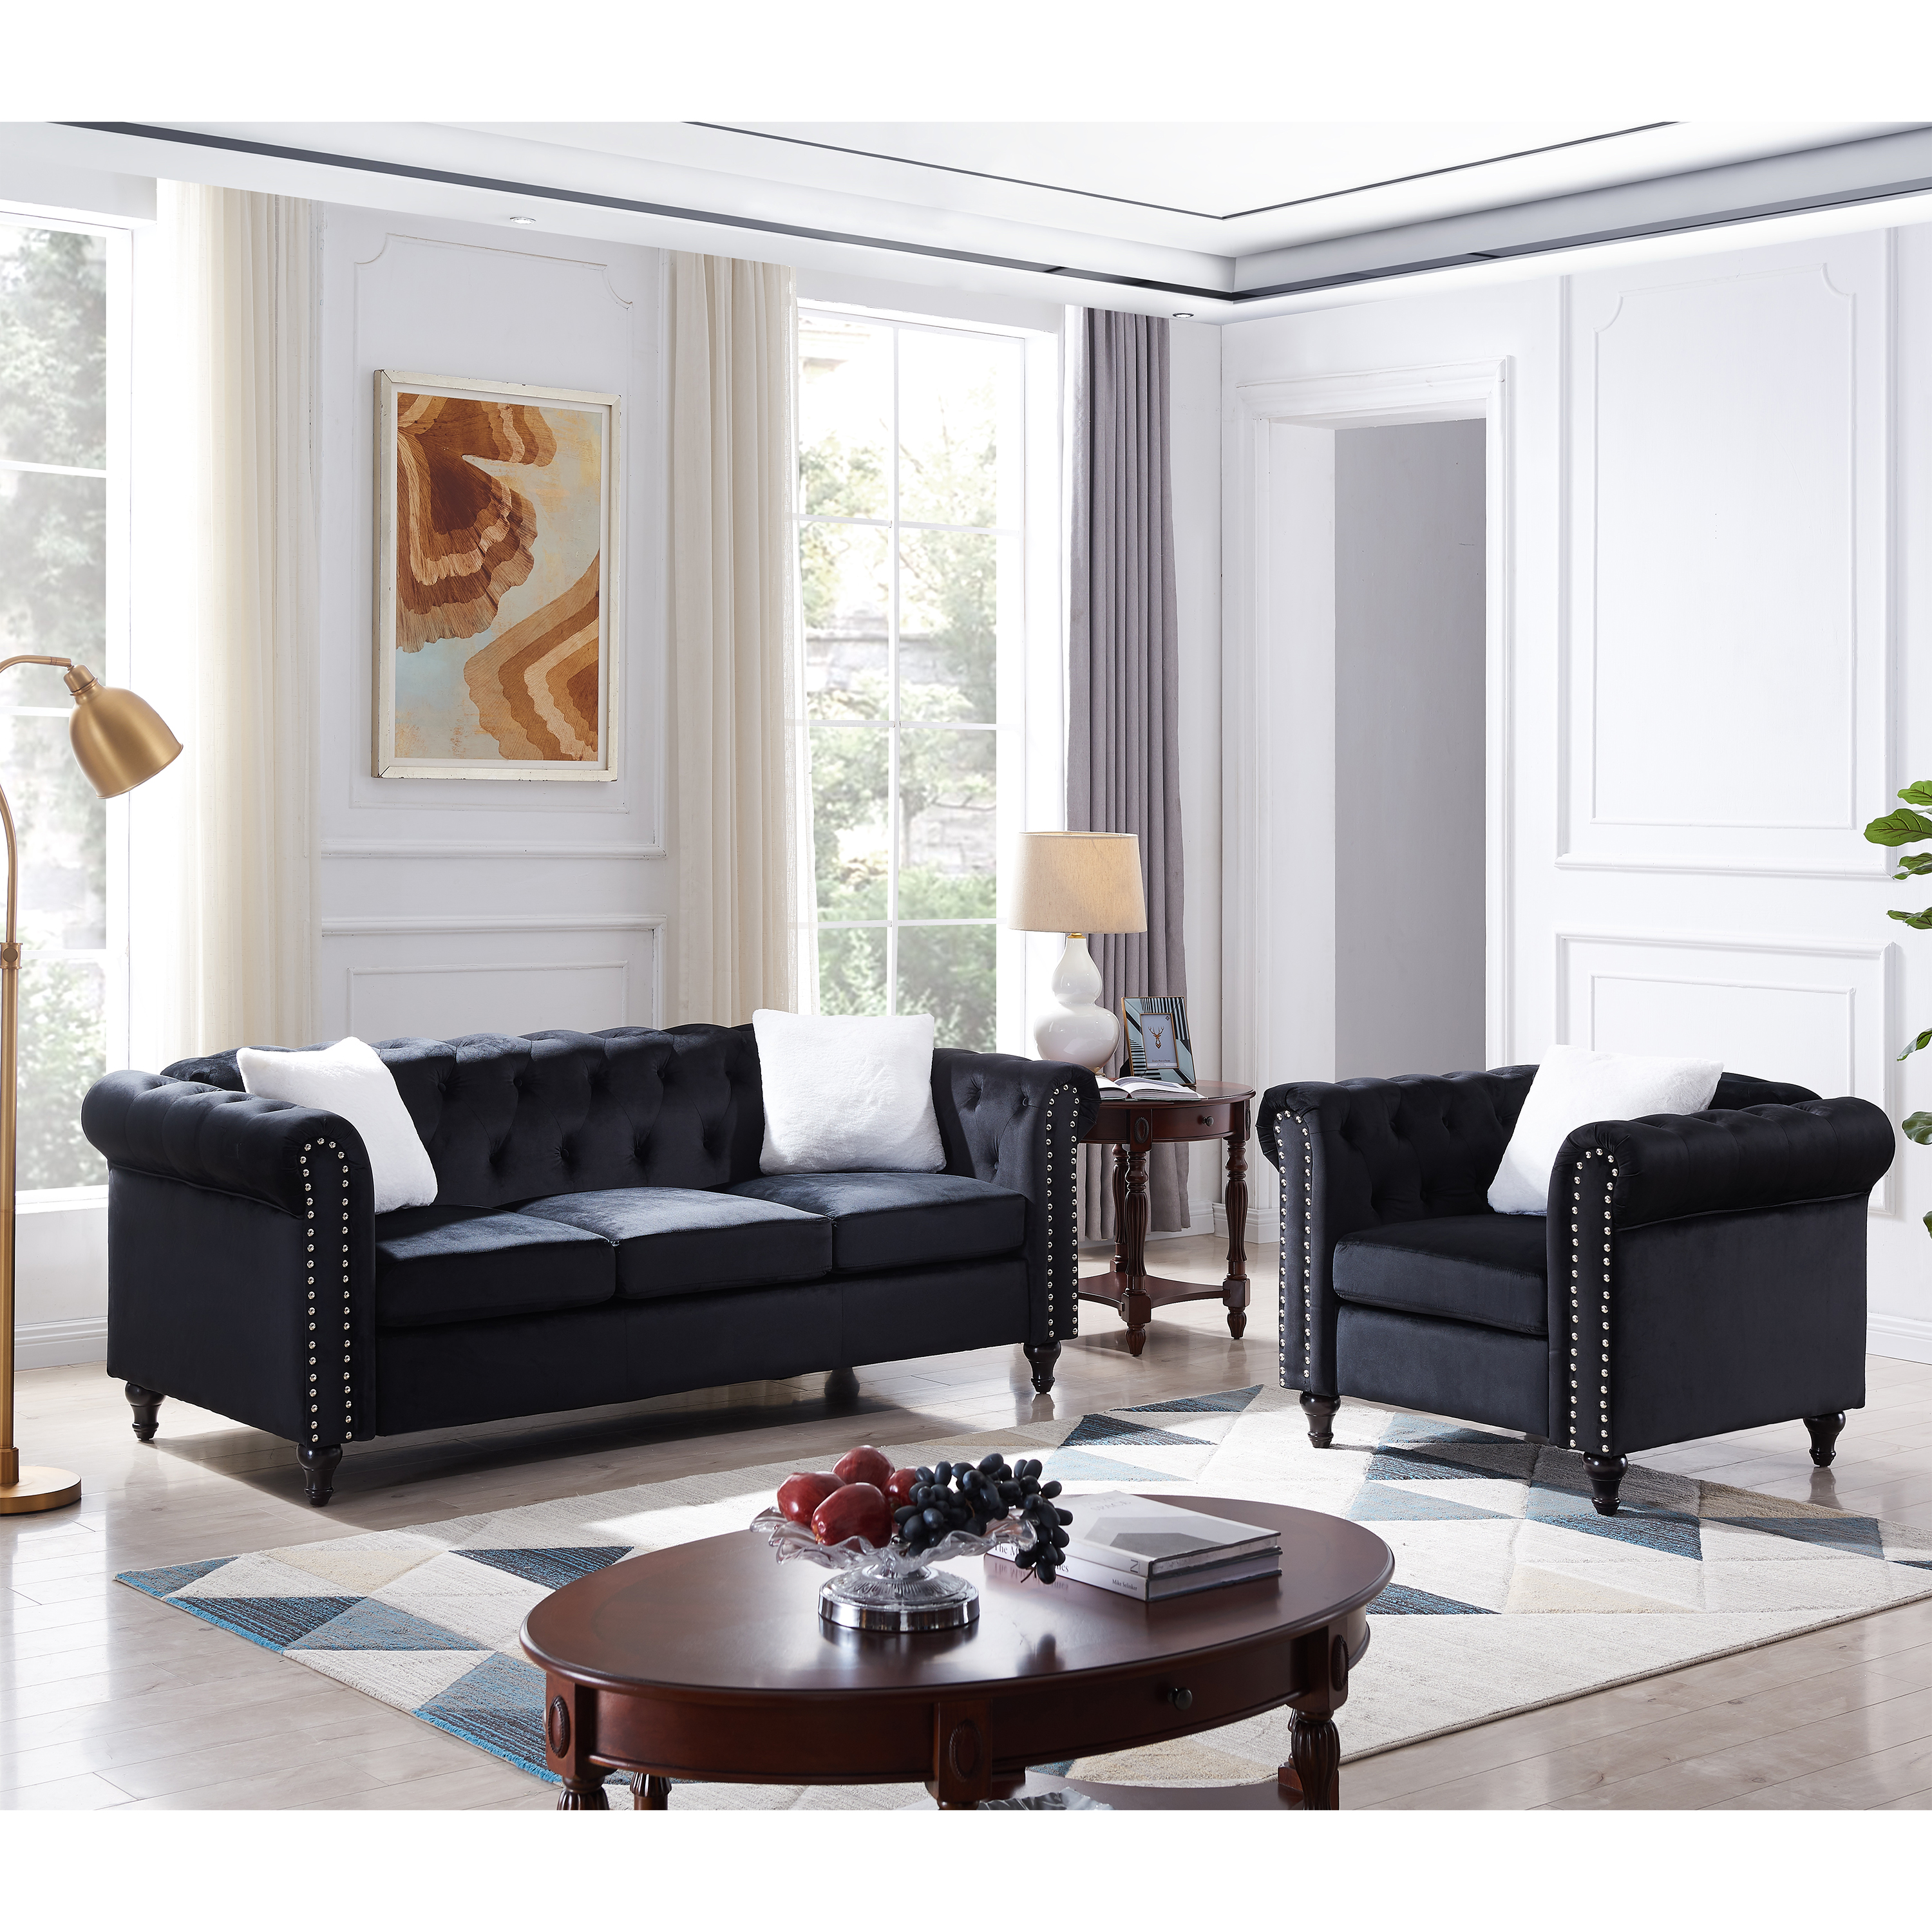 2 Piece Living Room Sofa Set, including 3-Seater Sofa and Sofa Chair, with Button and Copper Nail on Arms and Back,Three White Villose Pillow，Black-Boyel Living